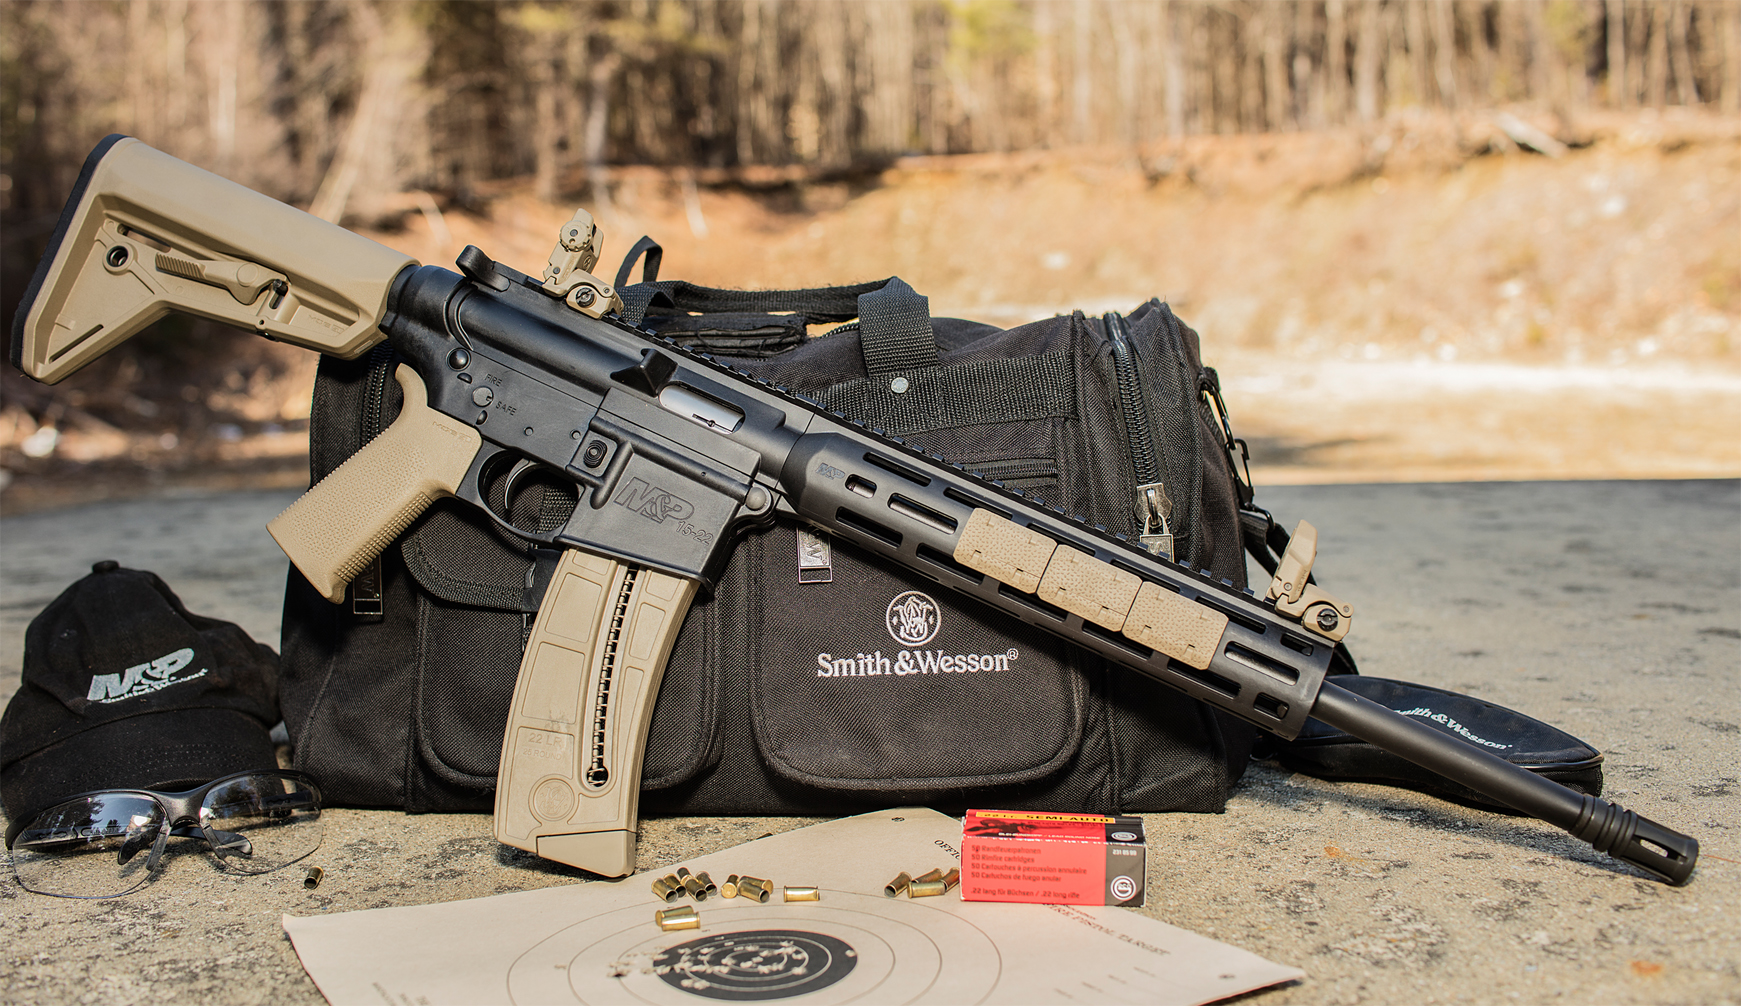 NEW: Smith & Wesson M&P15-22 SPORT ™ Rifle.